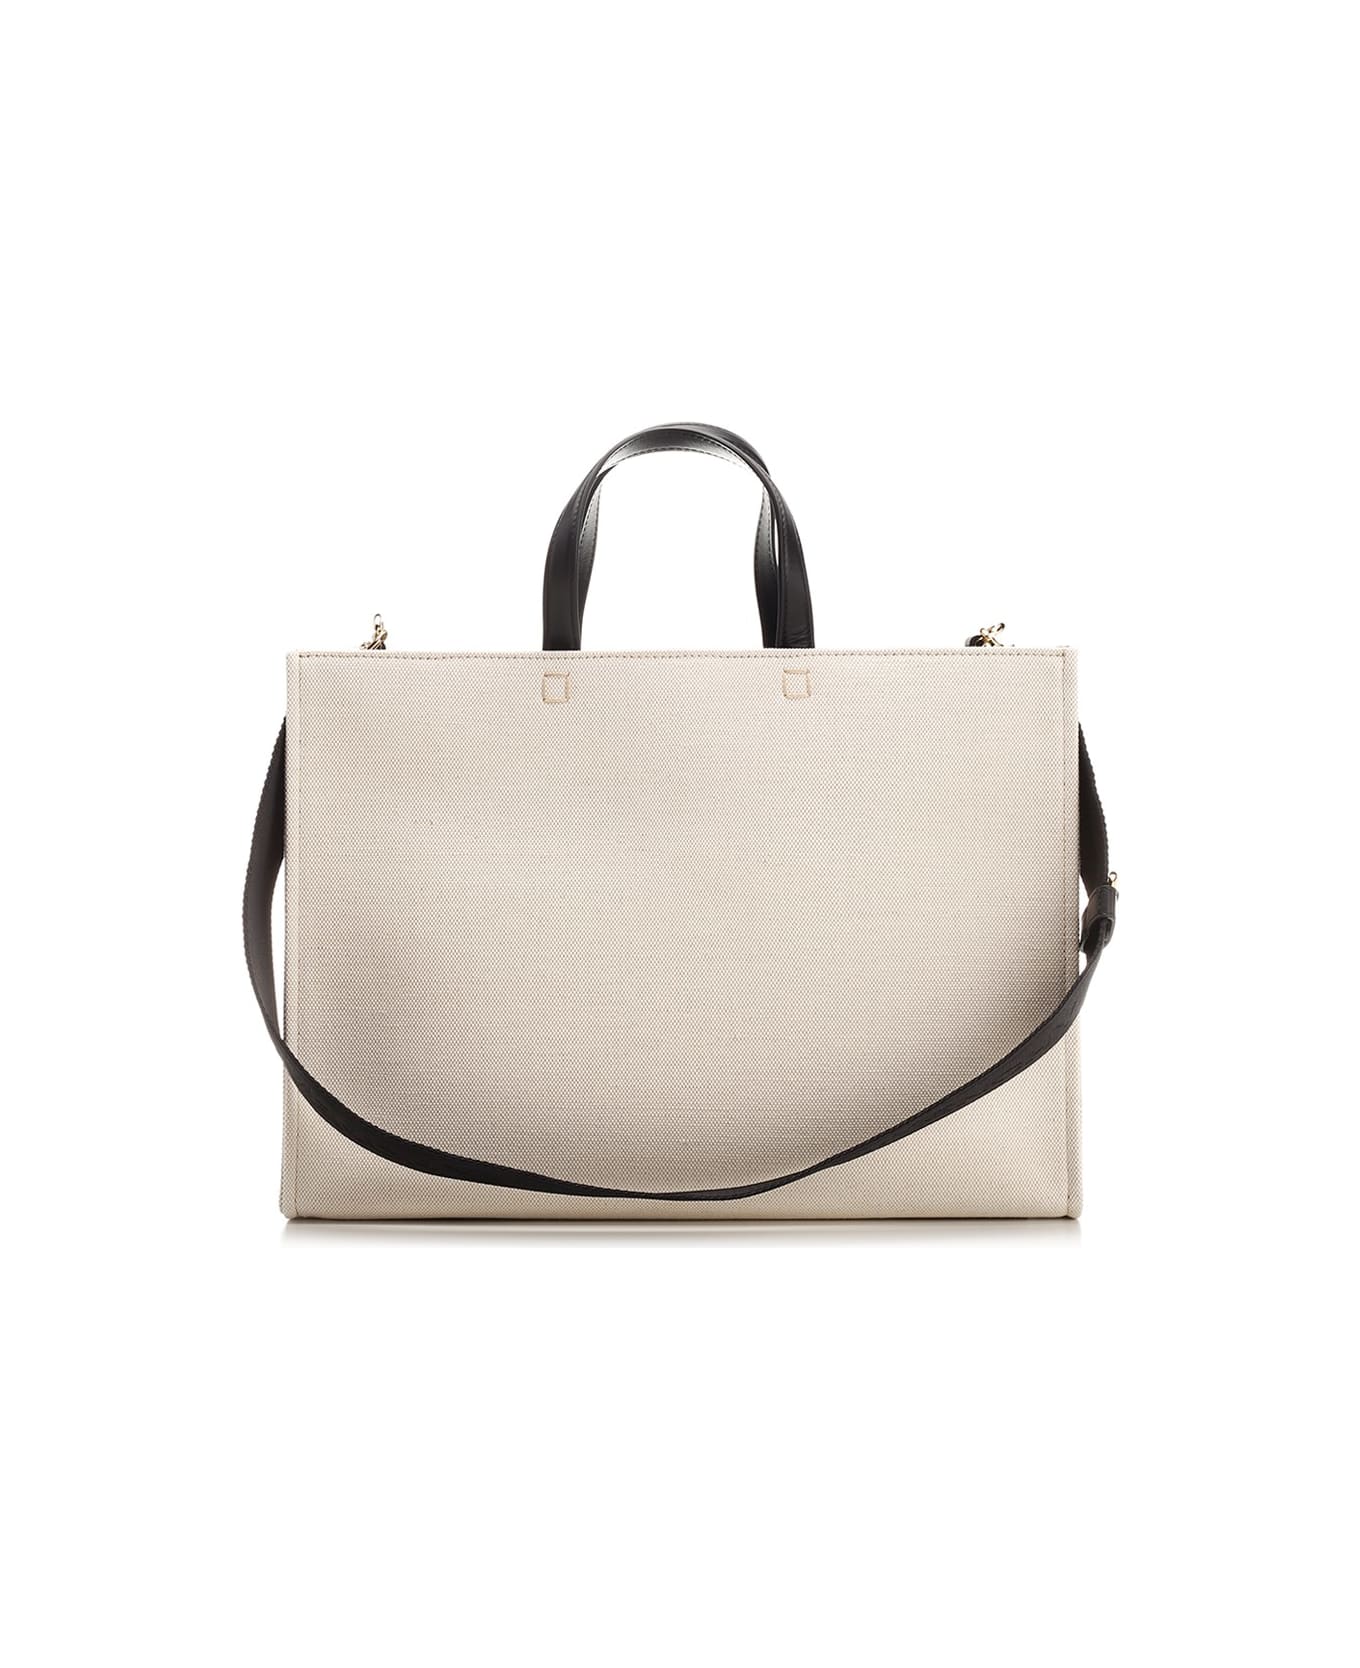 Givenchy 'g' Canvas Tote Bag - Beige